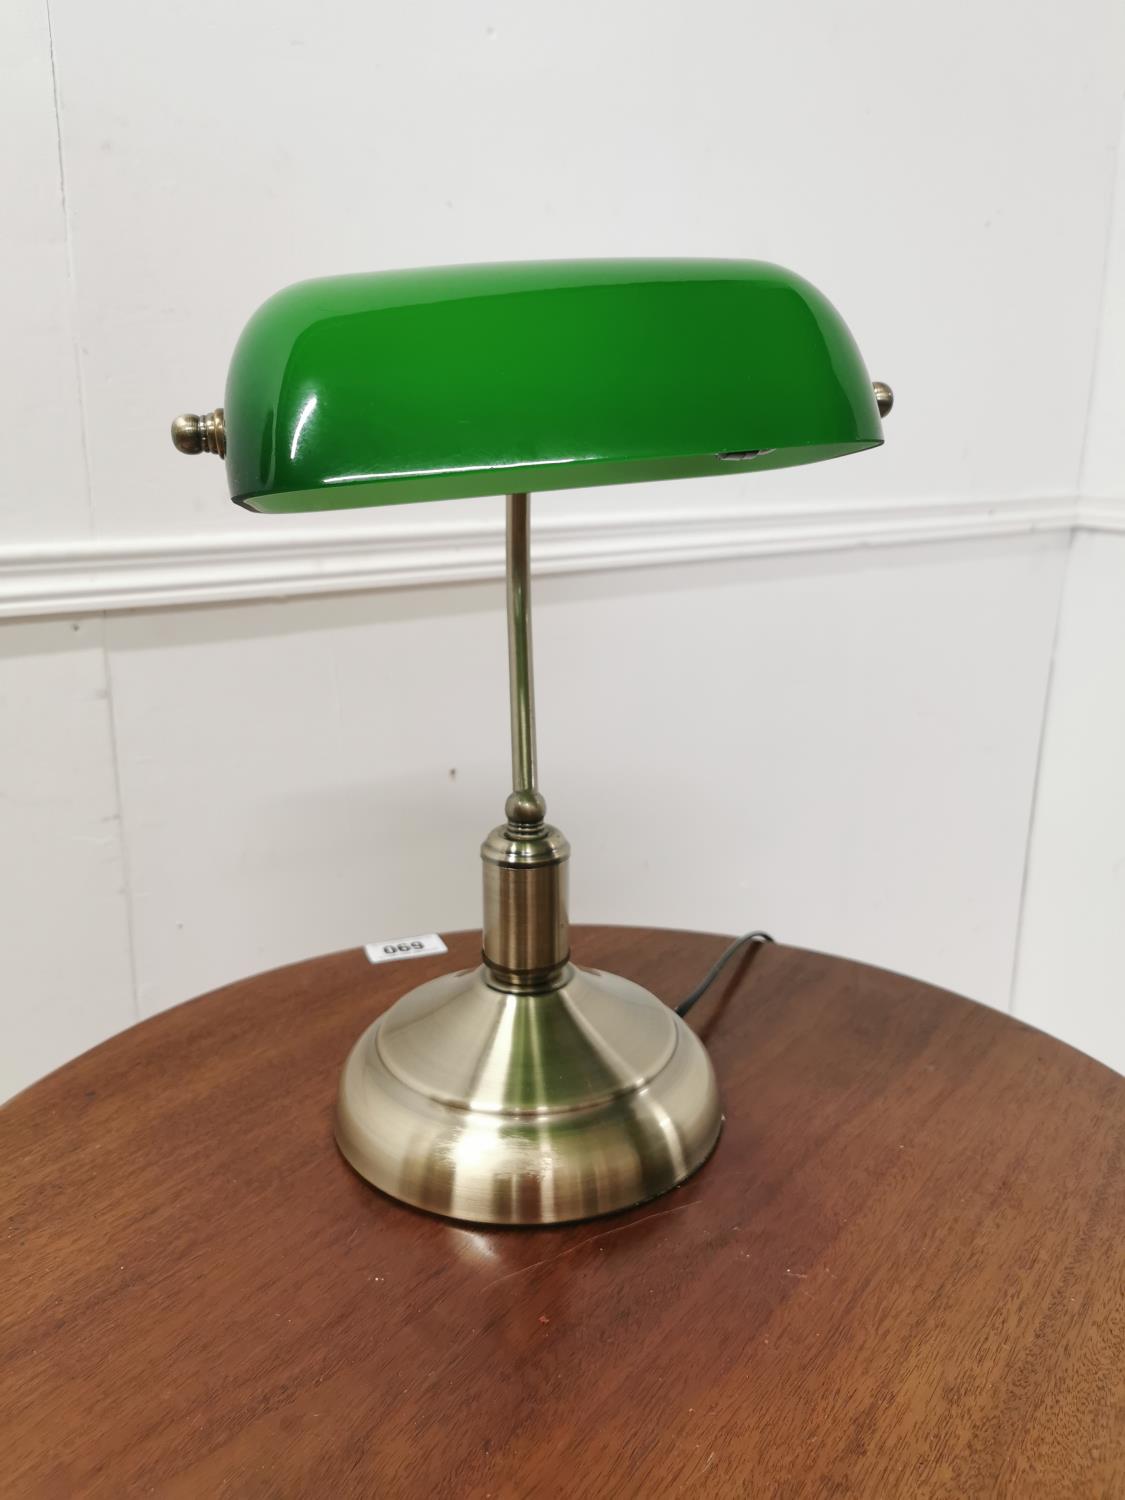 Banker's chrome desk lamp with green glass shade { 32cm H X 26cm W X 15cm D }.